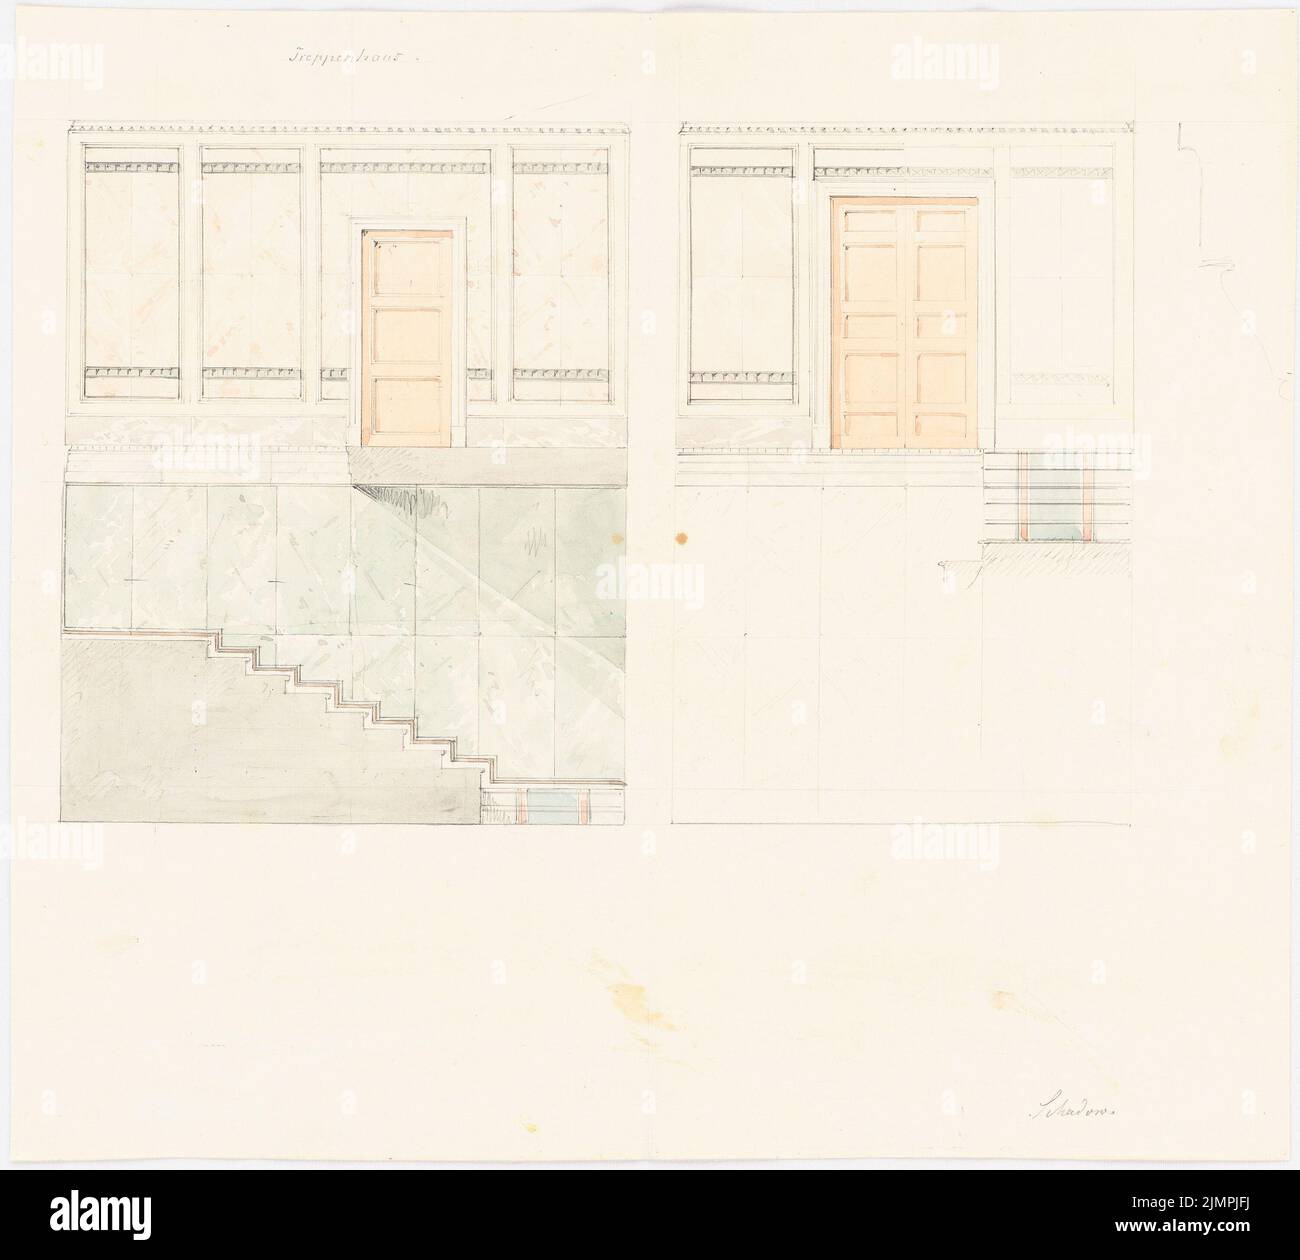 Schadow Albert (1797-1869), wall of a staircase (without date): cuts. Pencil watercolored on paper, 39.6 x 44 cm (including scan edges) Schadow Albert Dietrich  (1797-1869): Wand eines Treppenhauses Stock Photo